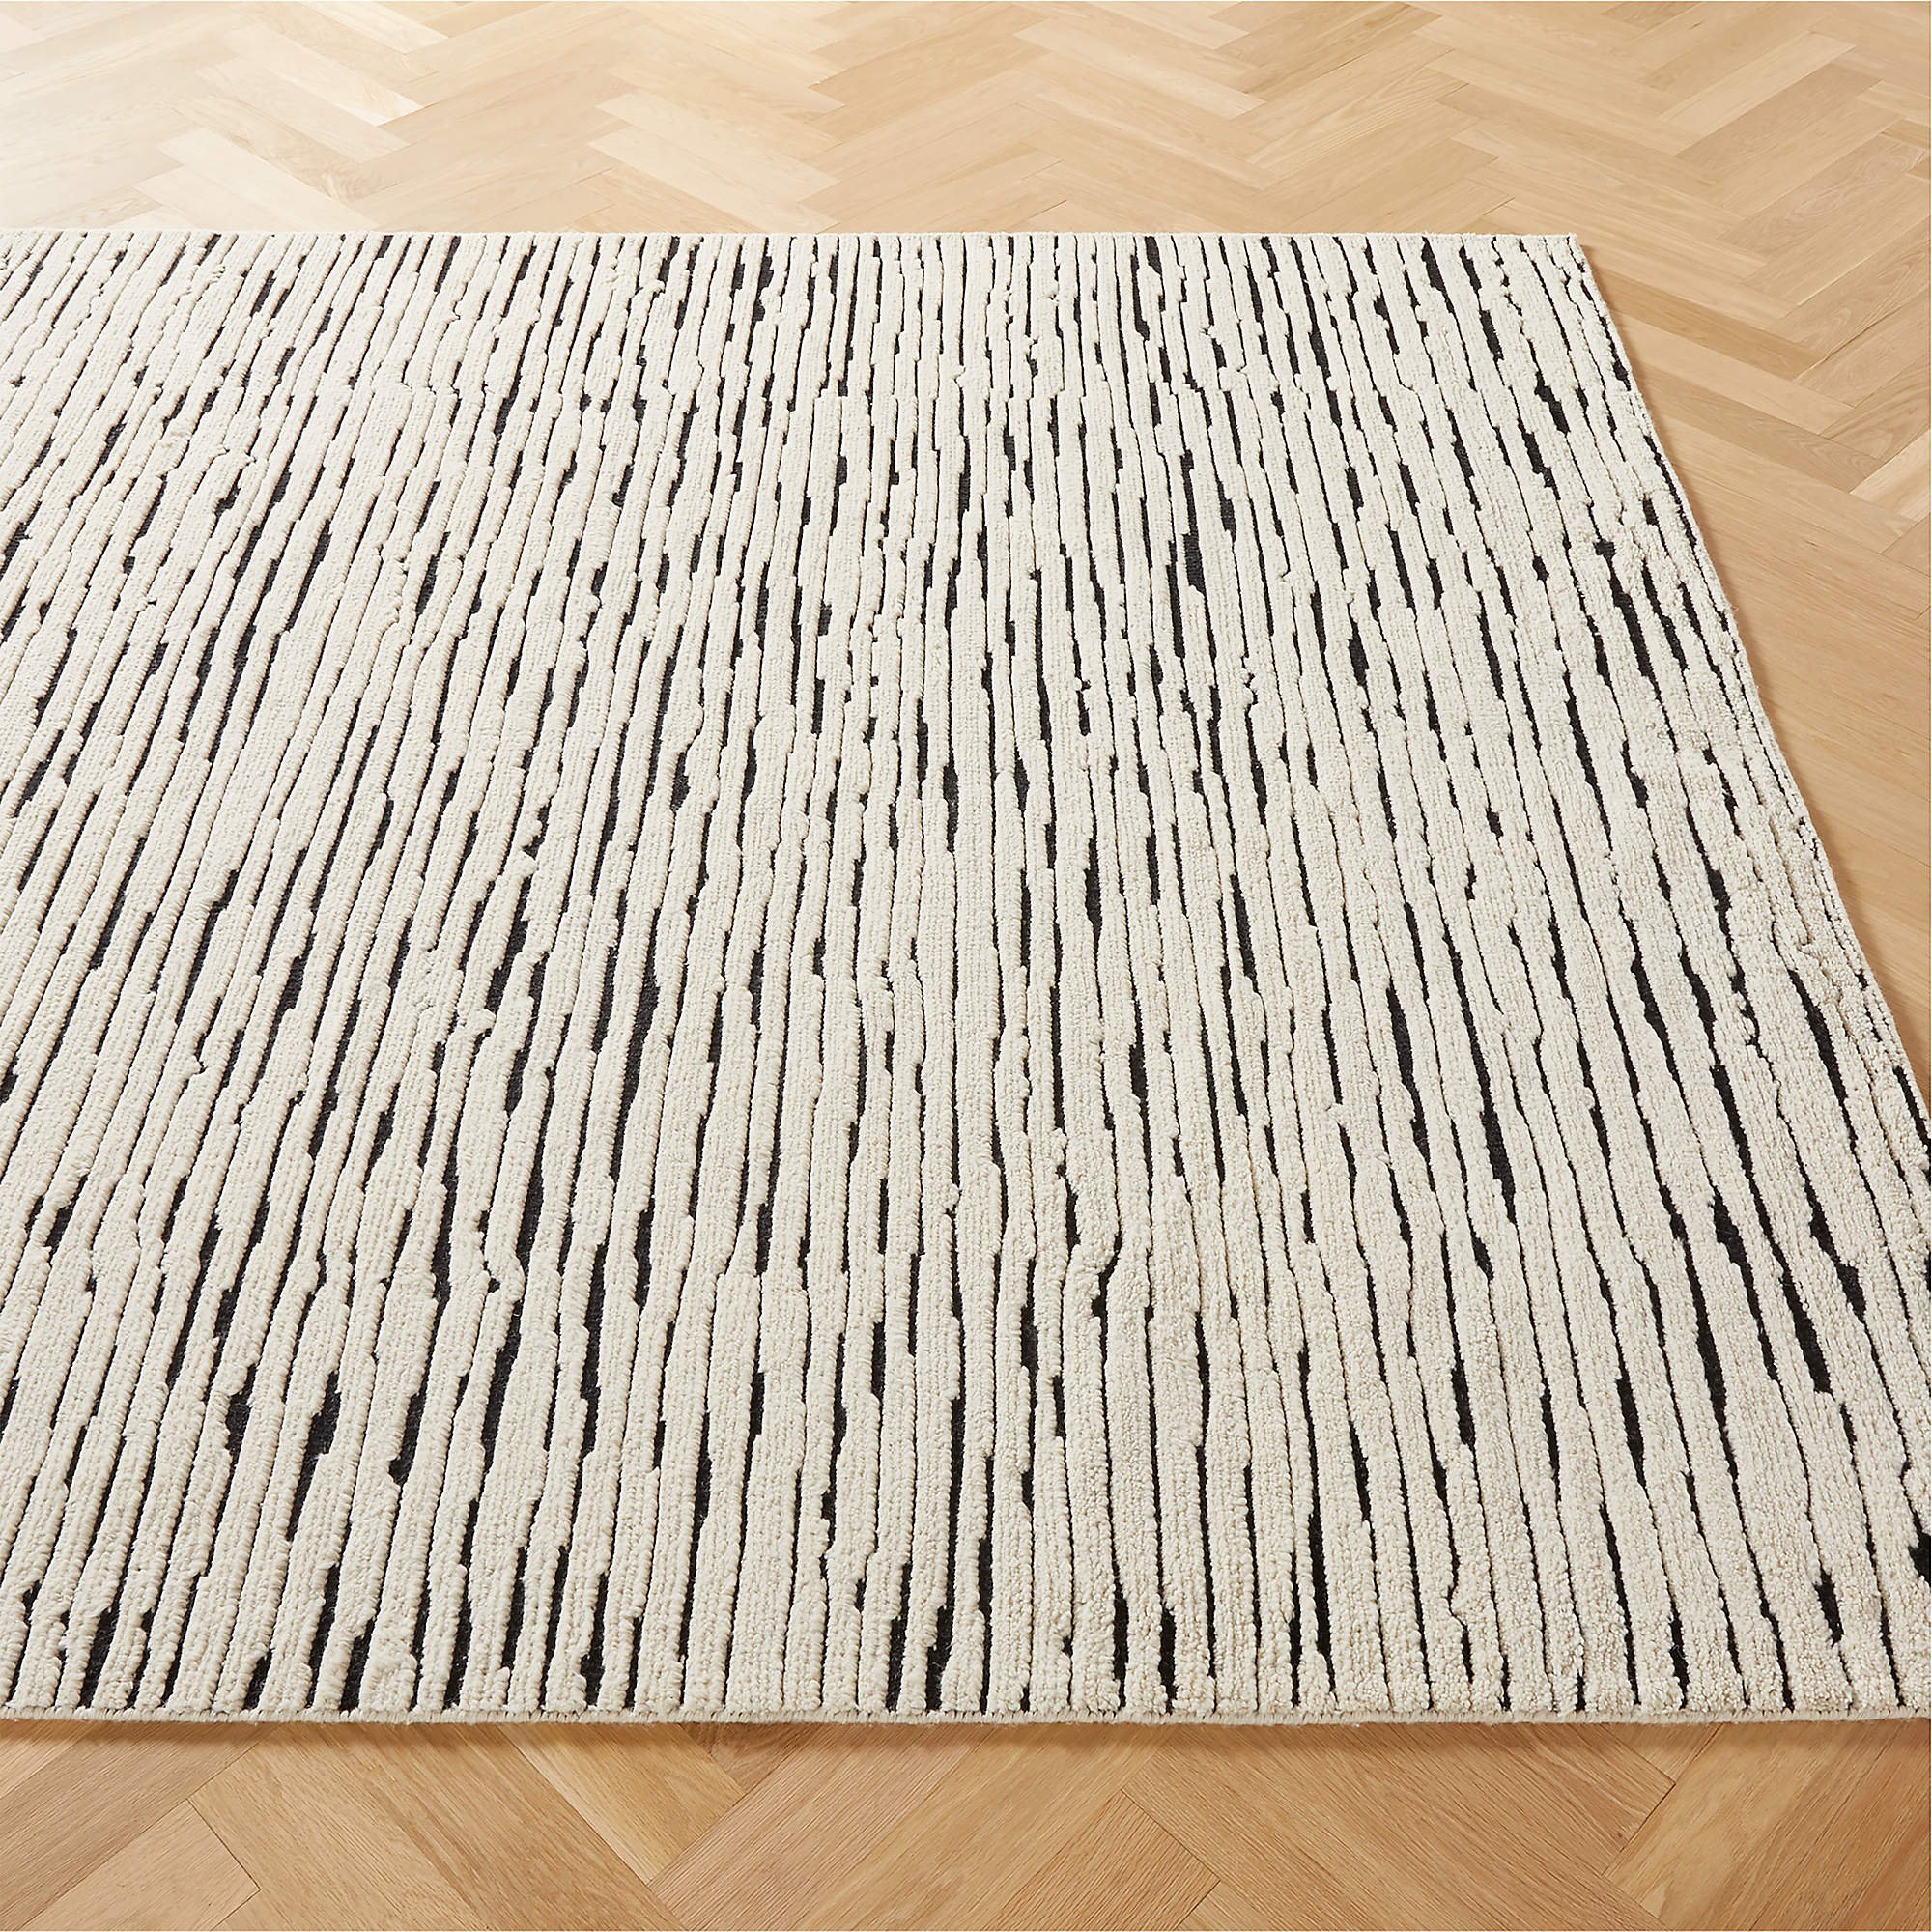 CB2 - $649 - Levi Hand-knotted New Zealand Wool Black and White Area Rug 